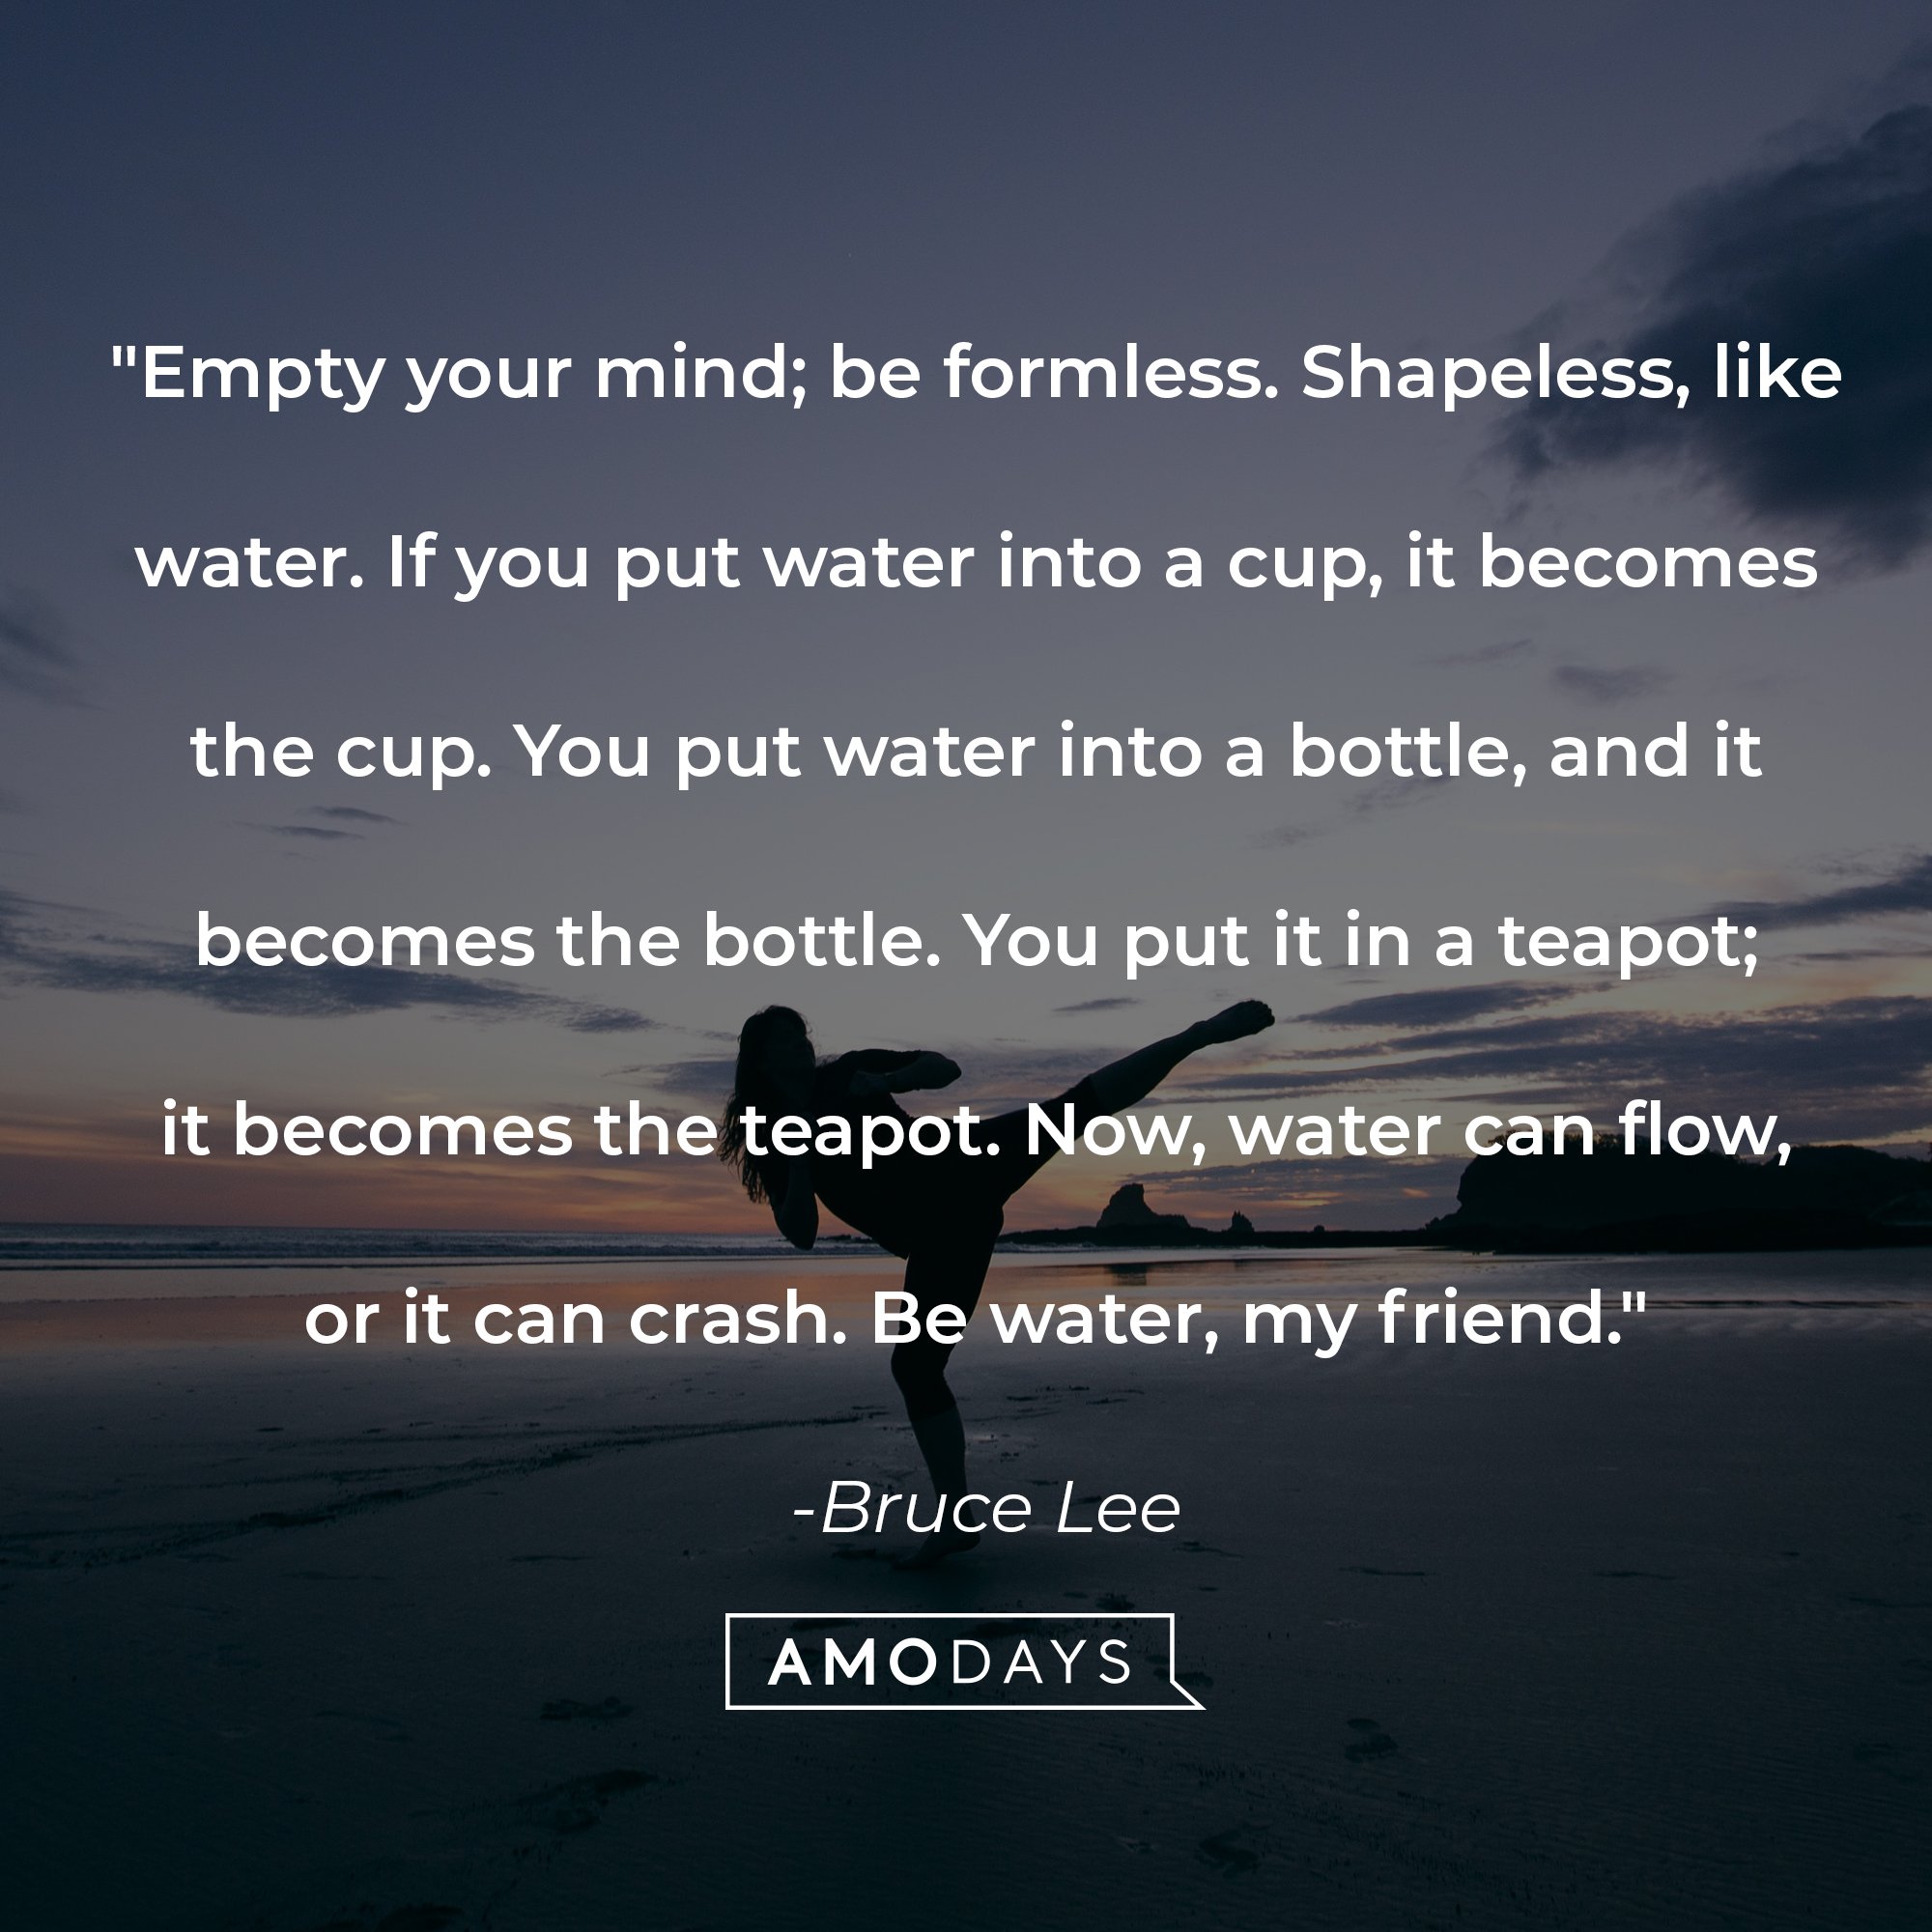 Bruce Lee’s quote: "Empty your mind; be formless. Shapeless, like water. If you put water into a cup, it becomes the cup. You put water into a bottle, and it becomes the bottle. You put it in a teapot; it becomes the teapot. Now, water can flow, or it can crash. Be water, my friend." | Image: AmoDays    